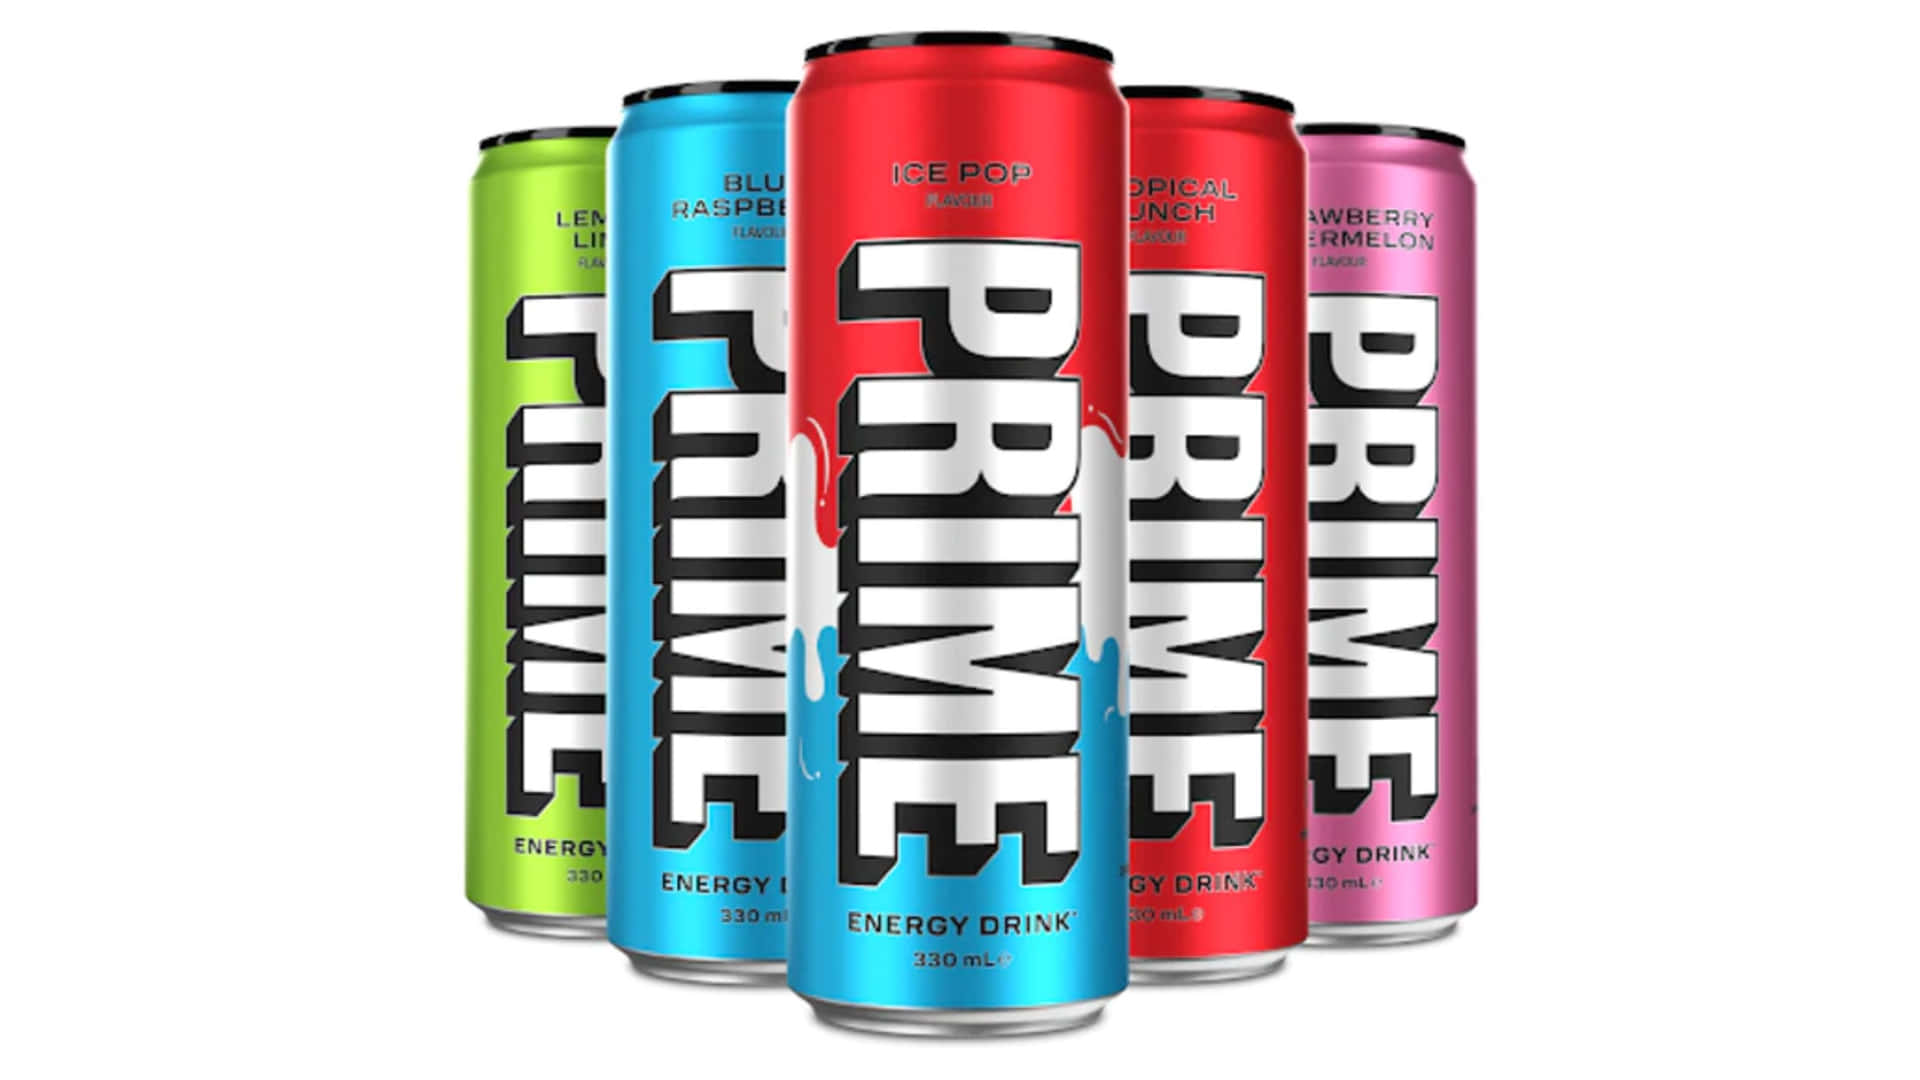 Prime Energy Drink Can Variety Pack Wallpaper